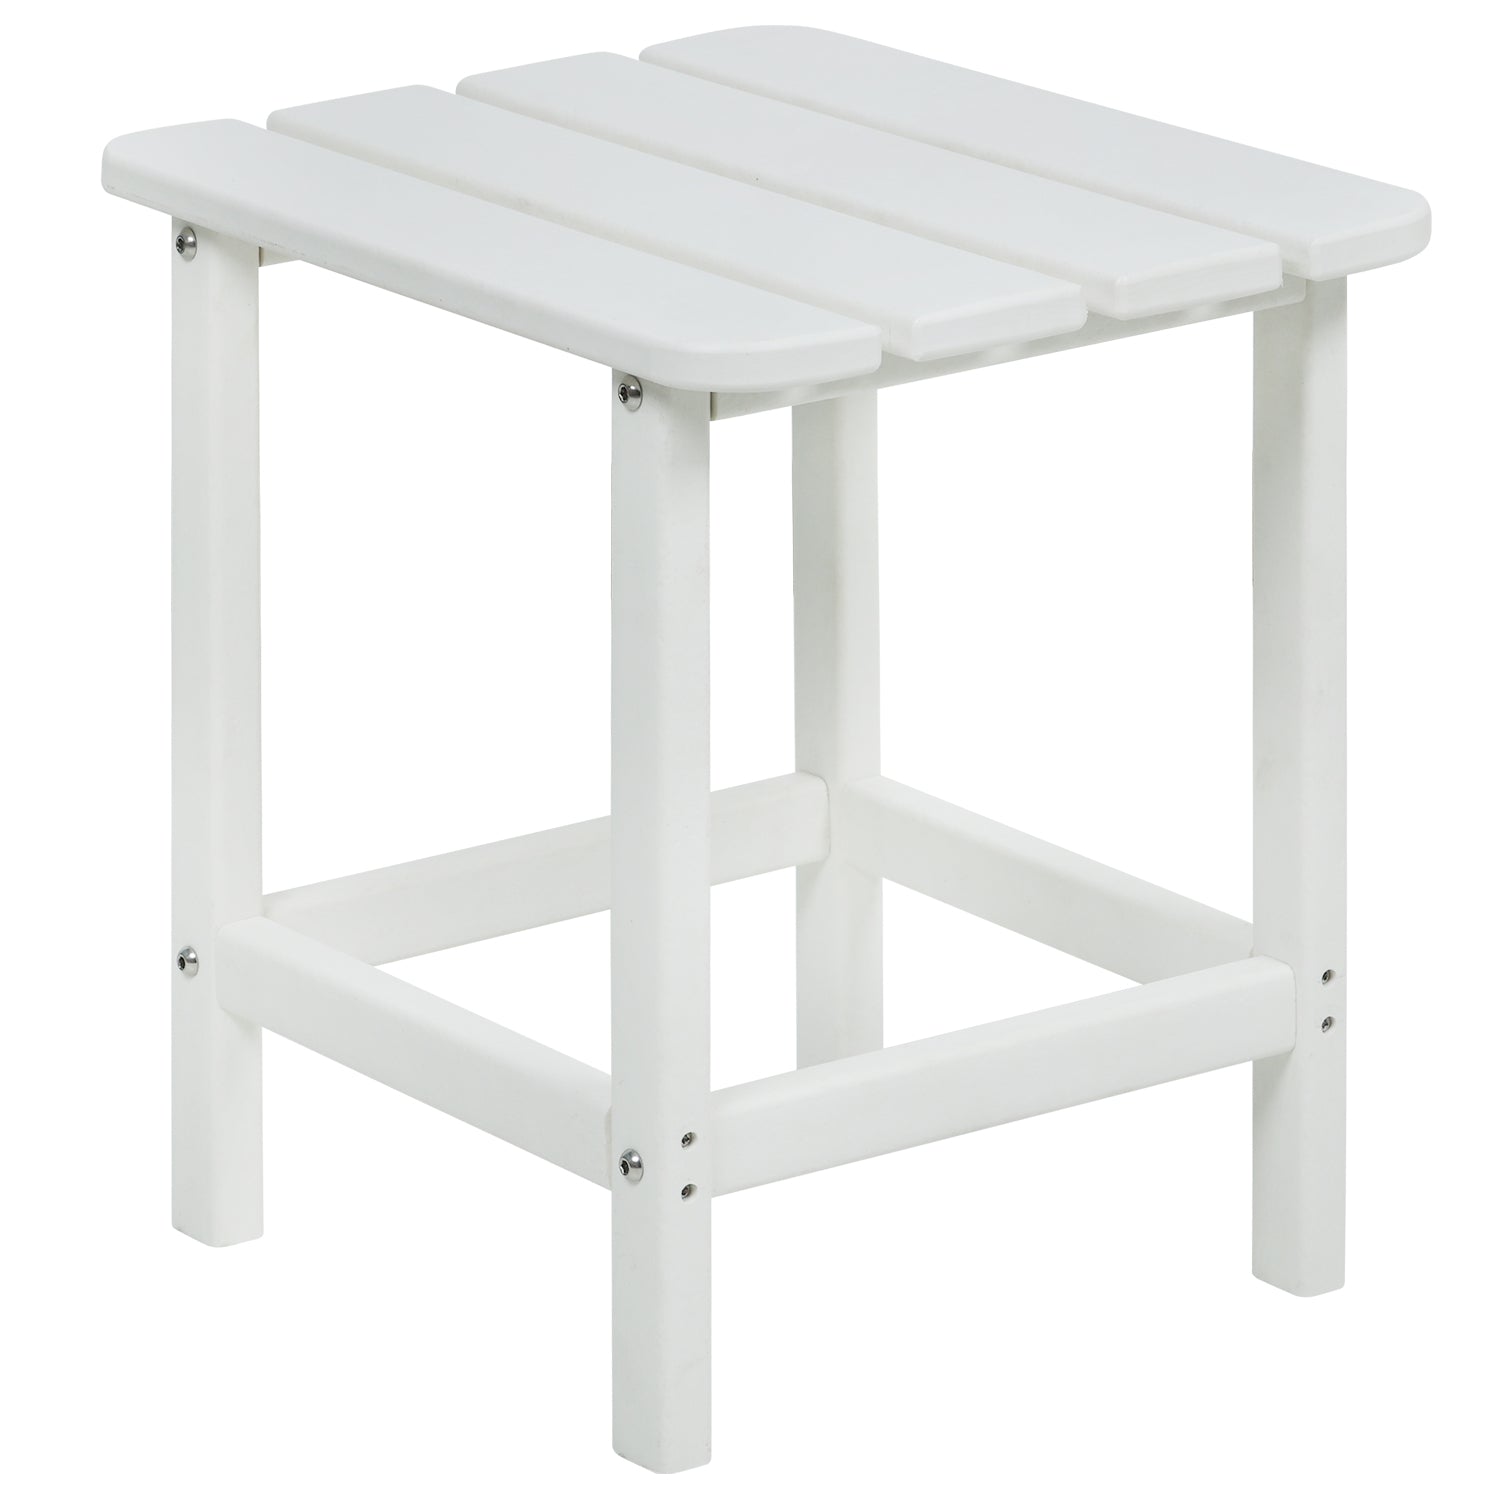 Outdoor Side Table, Square Adirondack Patio End Table for Patio, Pool, Porch Furniture Aoodor White  